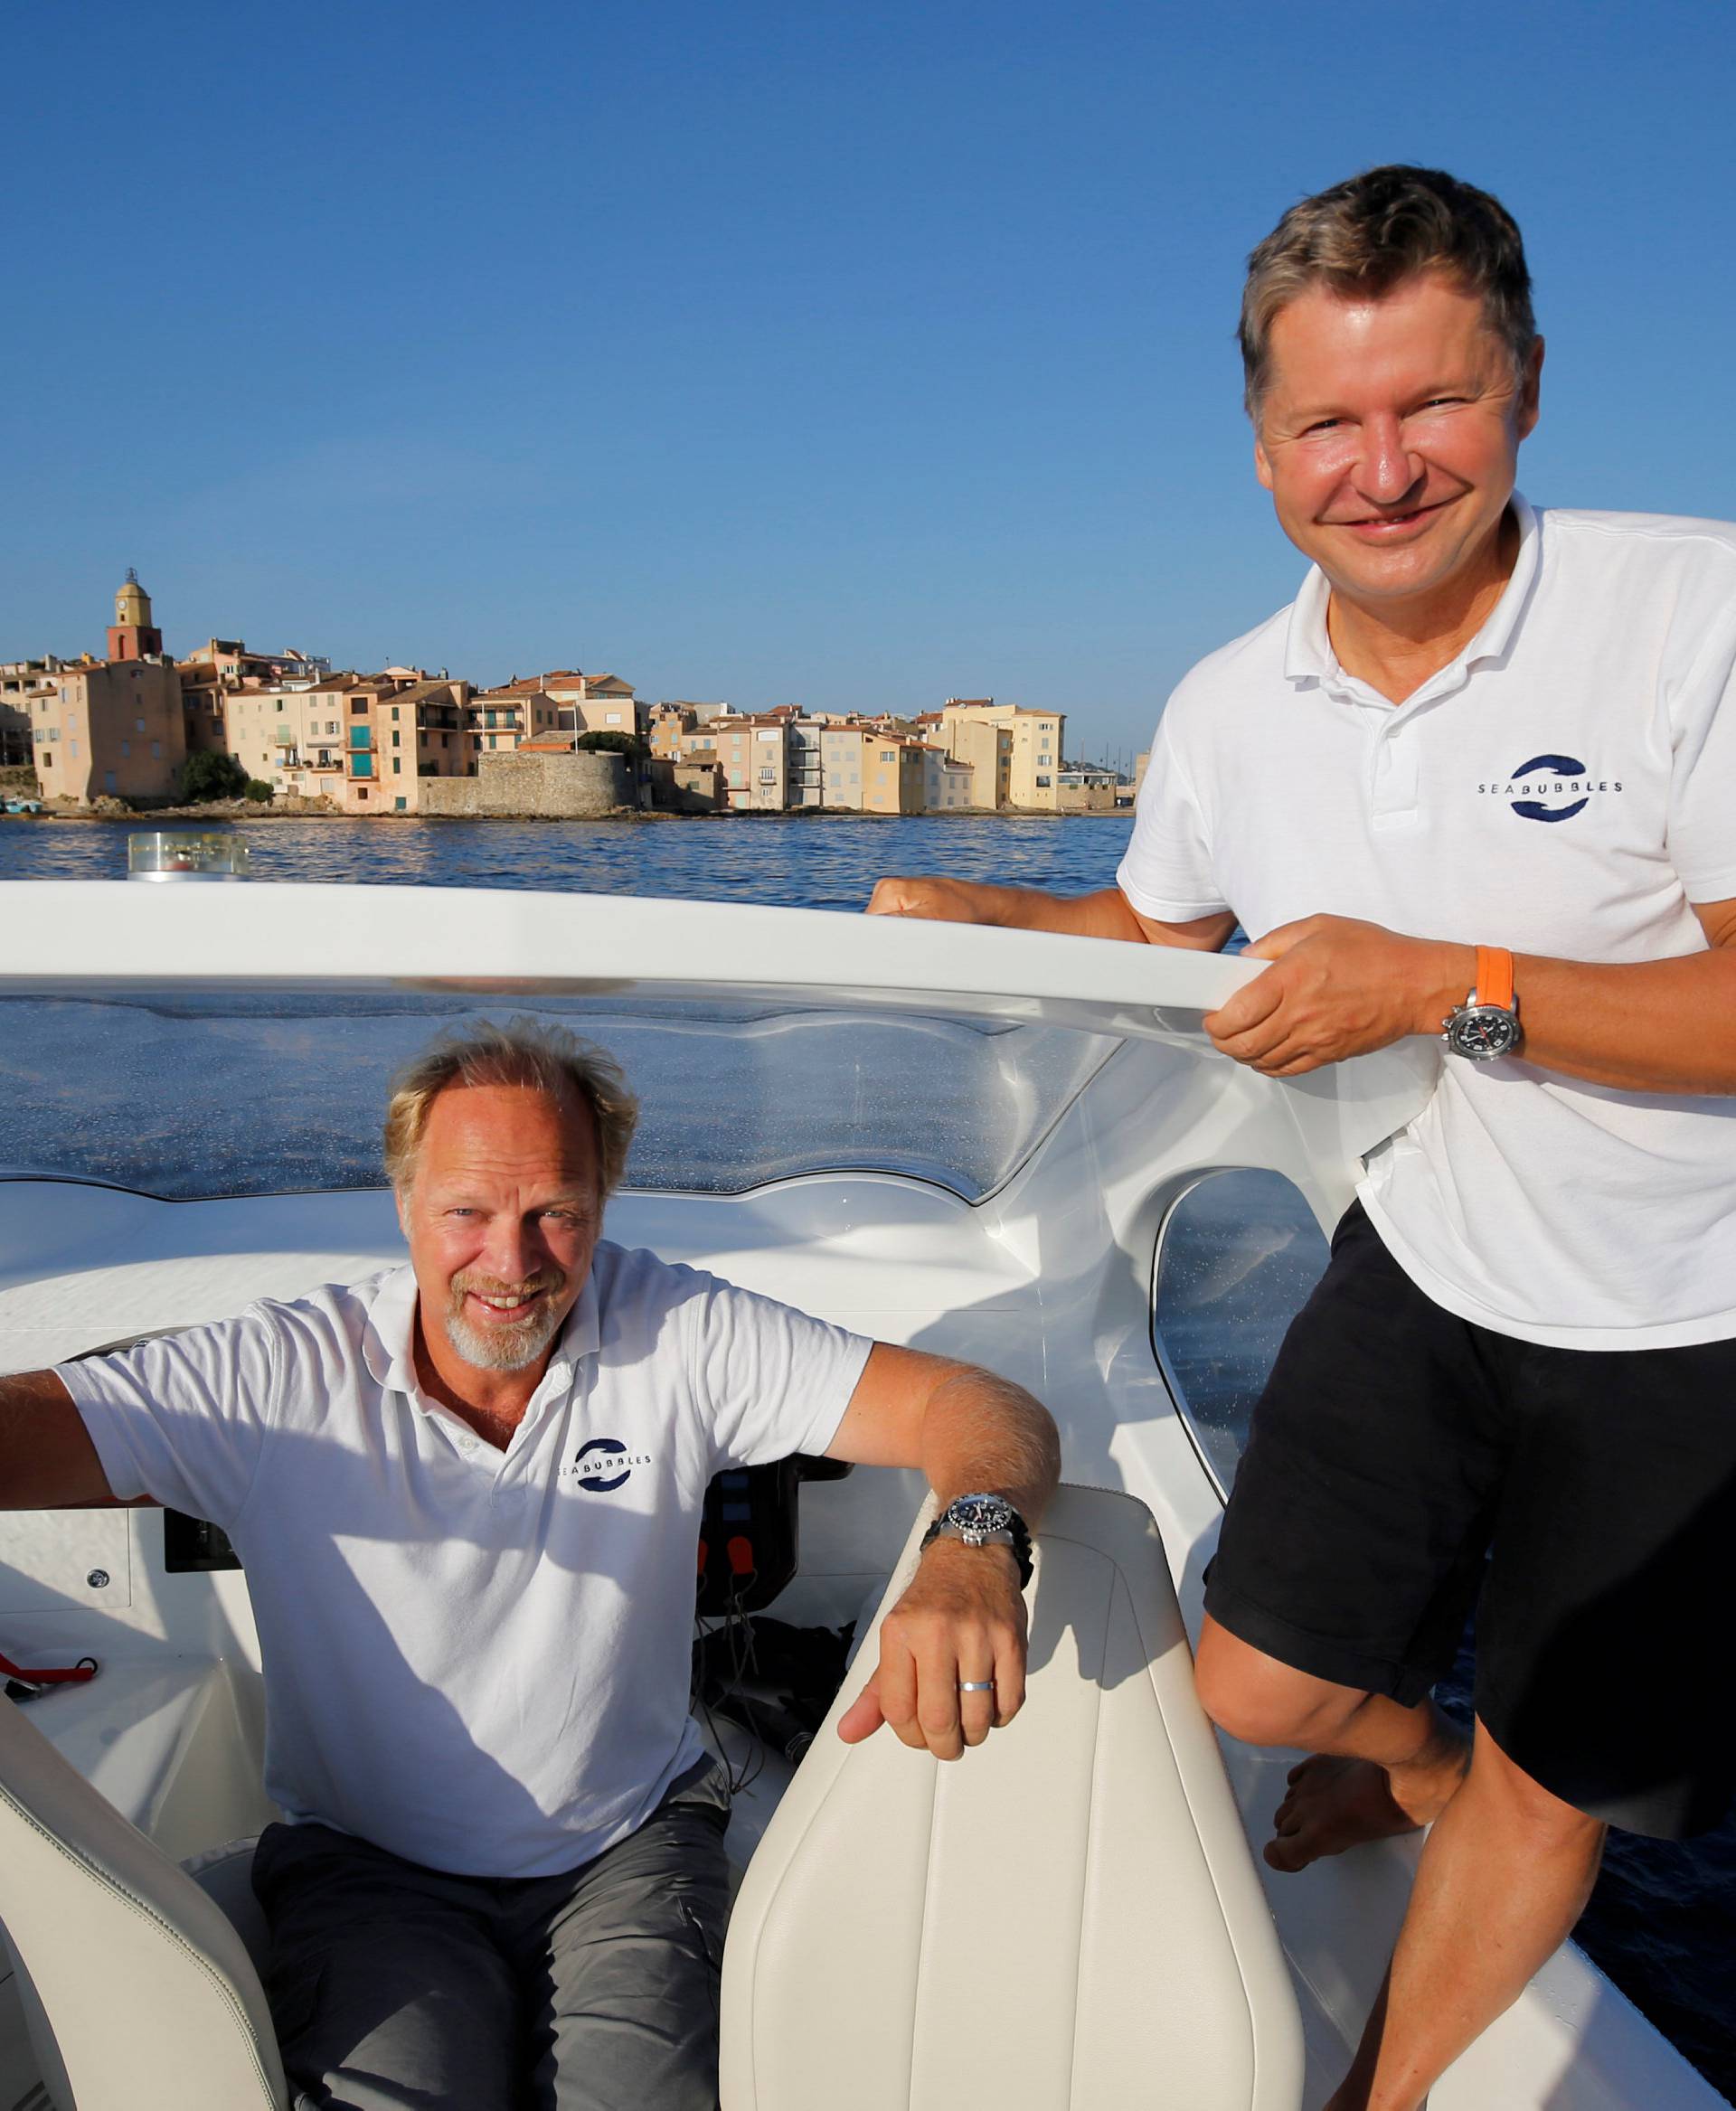 SeaBubbles' founder and president, Bringdal, and founder and VP, Thebault, pose aboard prototype of their water taxi in the harbour of Saint-Tropez